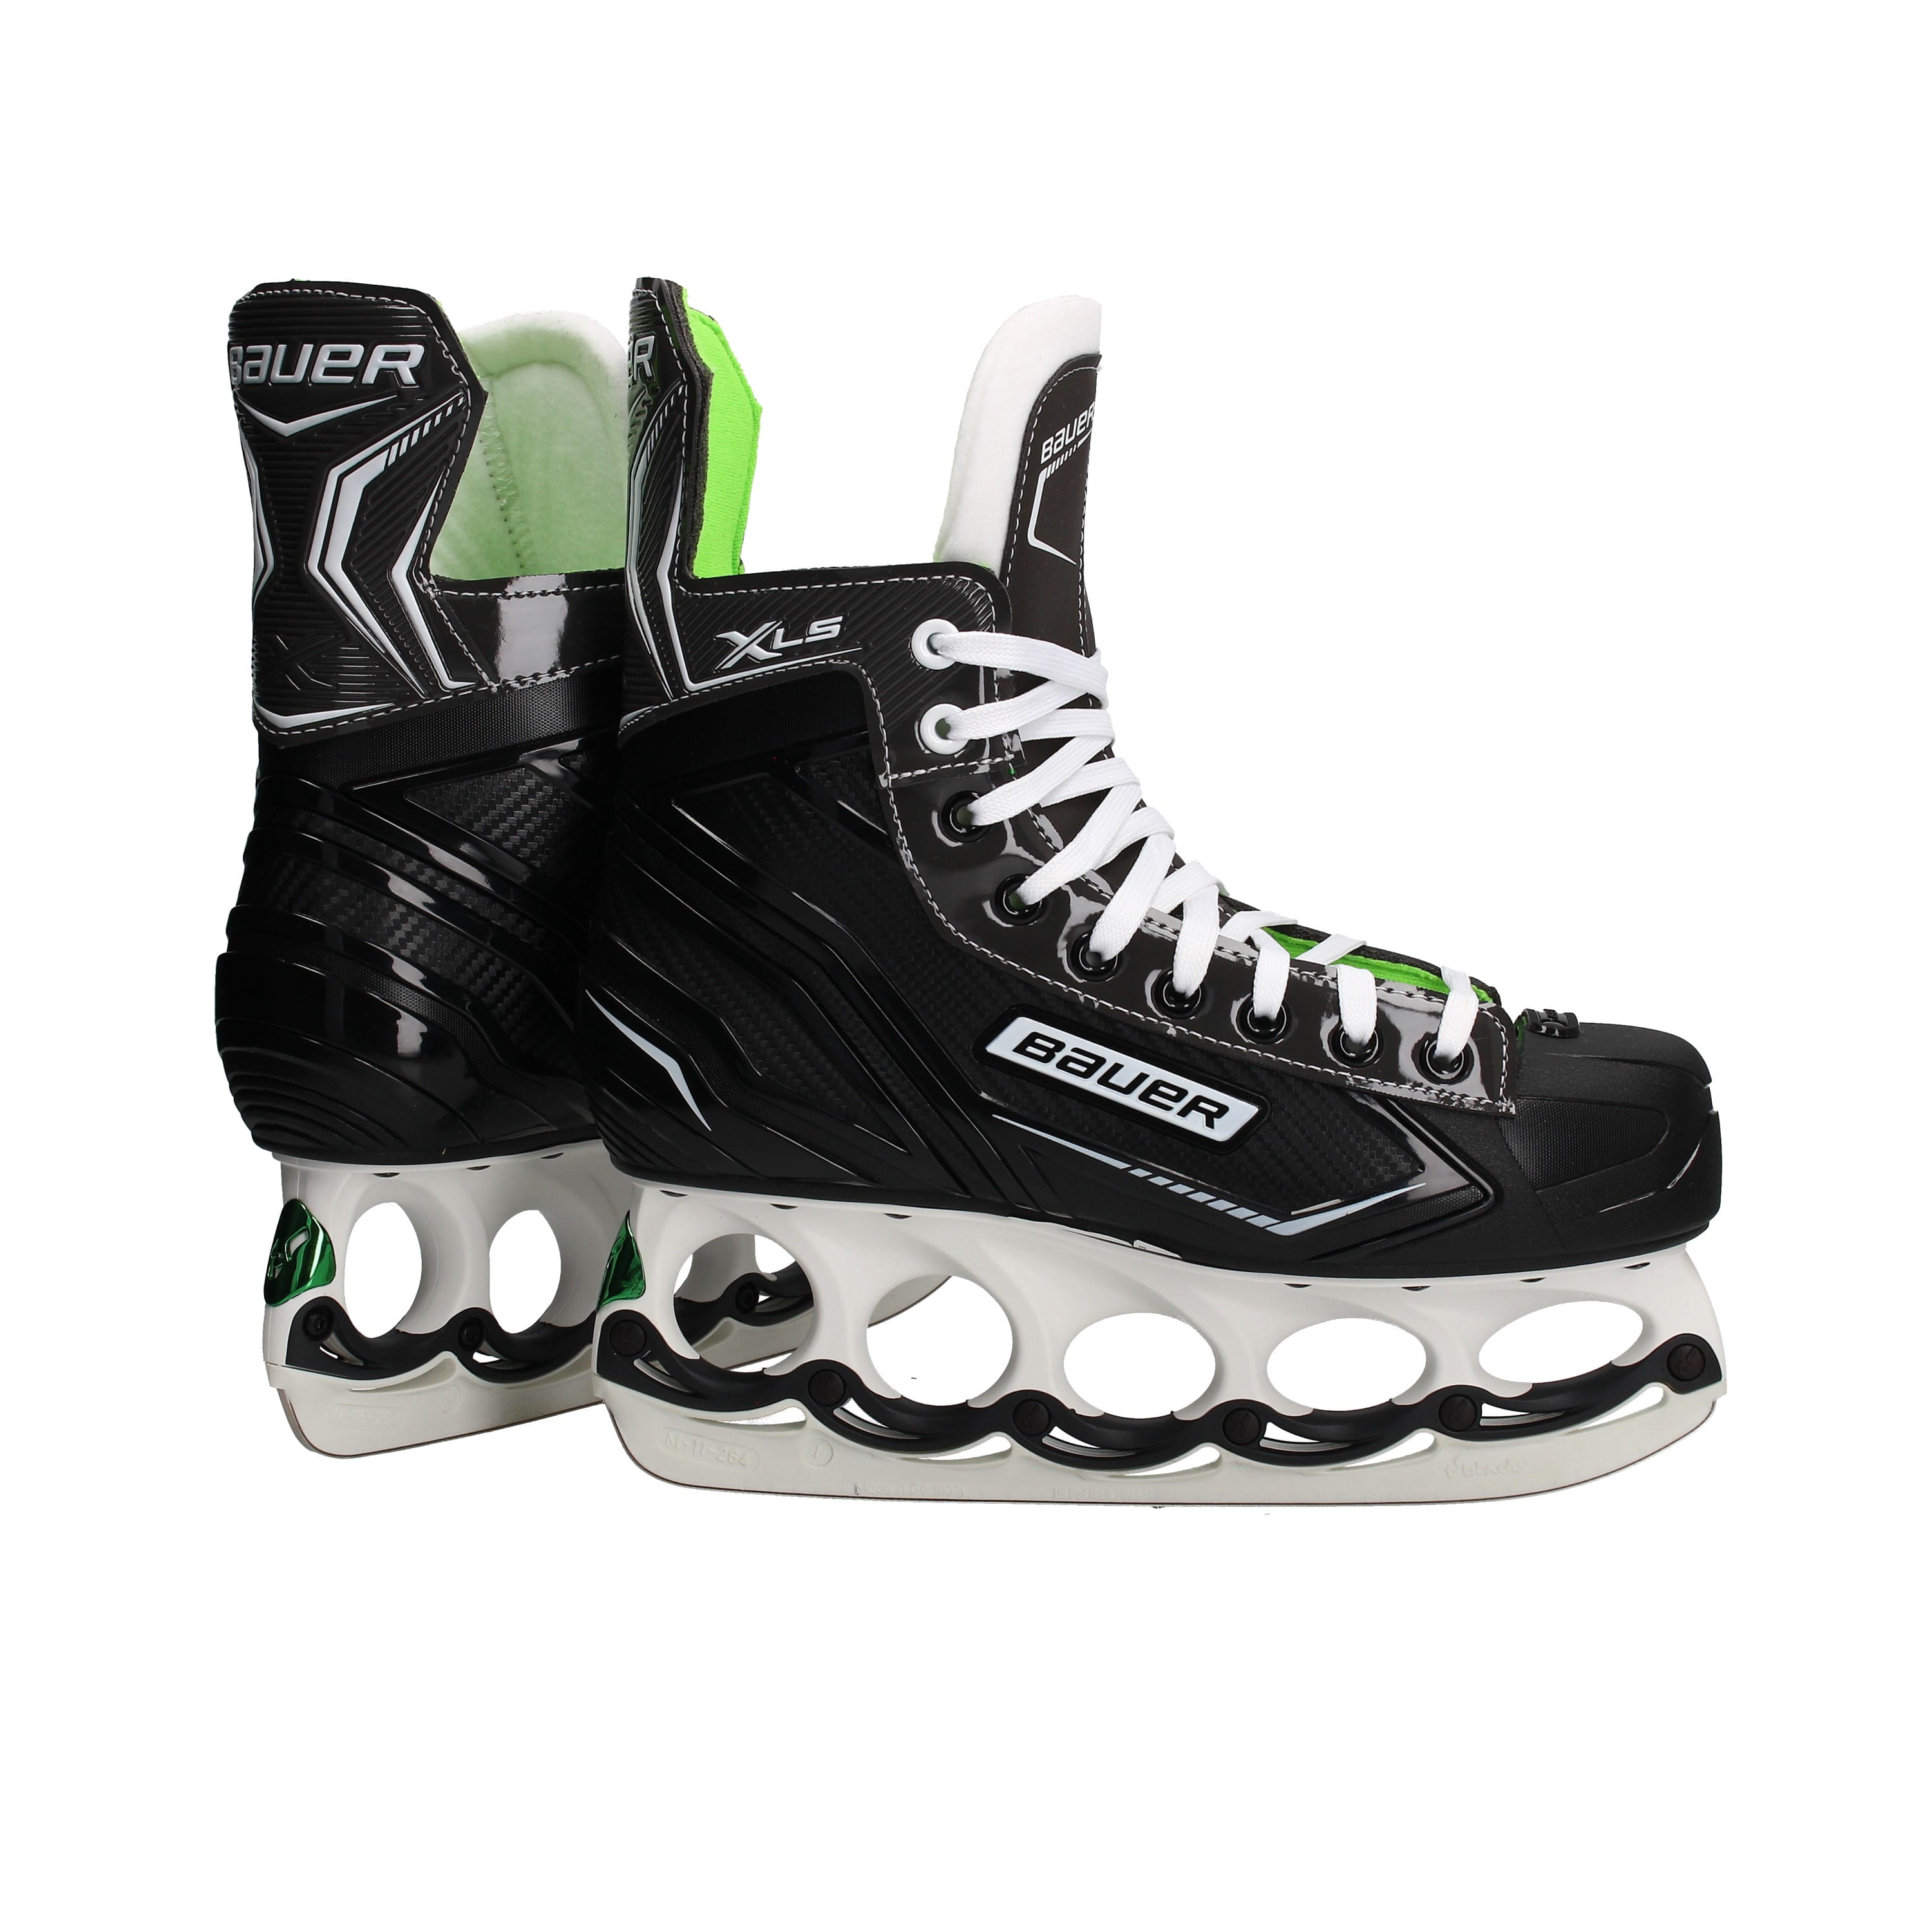 Patins à Glace Bauer X-LS T-Blade Black-Edition Hockey Loisirs Ice  Freestyle